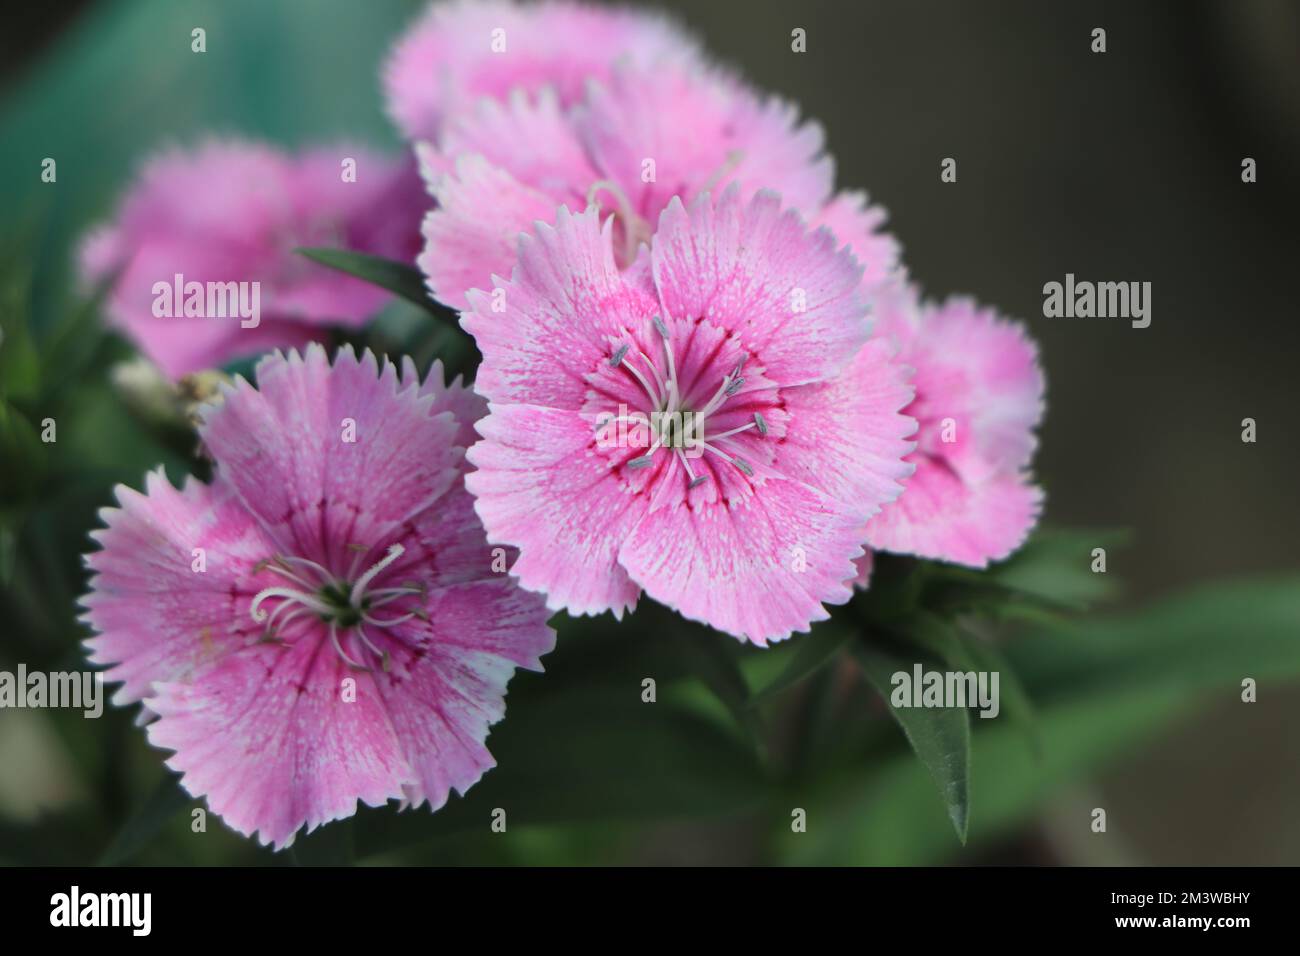 Dianthus gratianopolitanus or cheddar pink many pink flowers Stock Photo